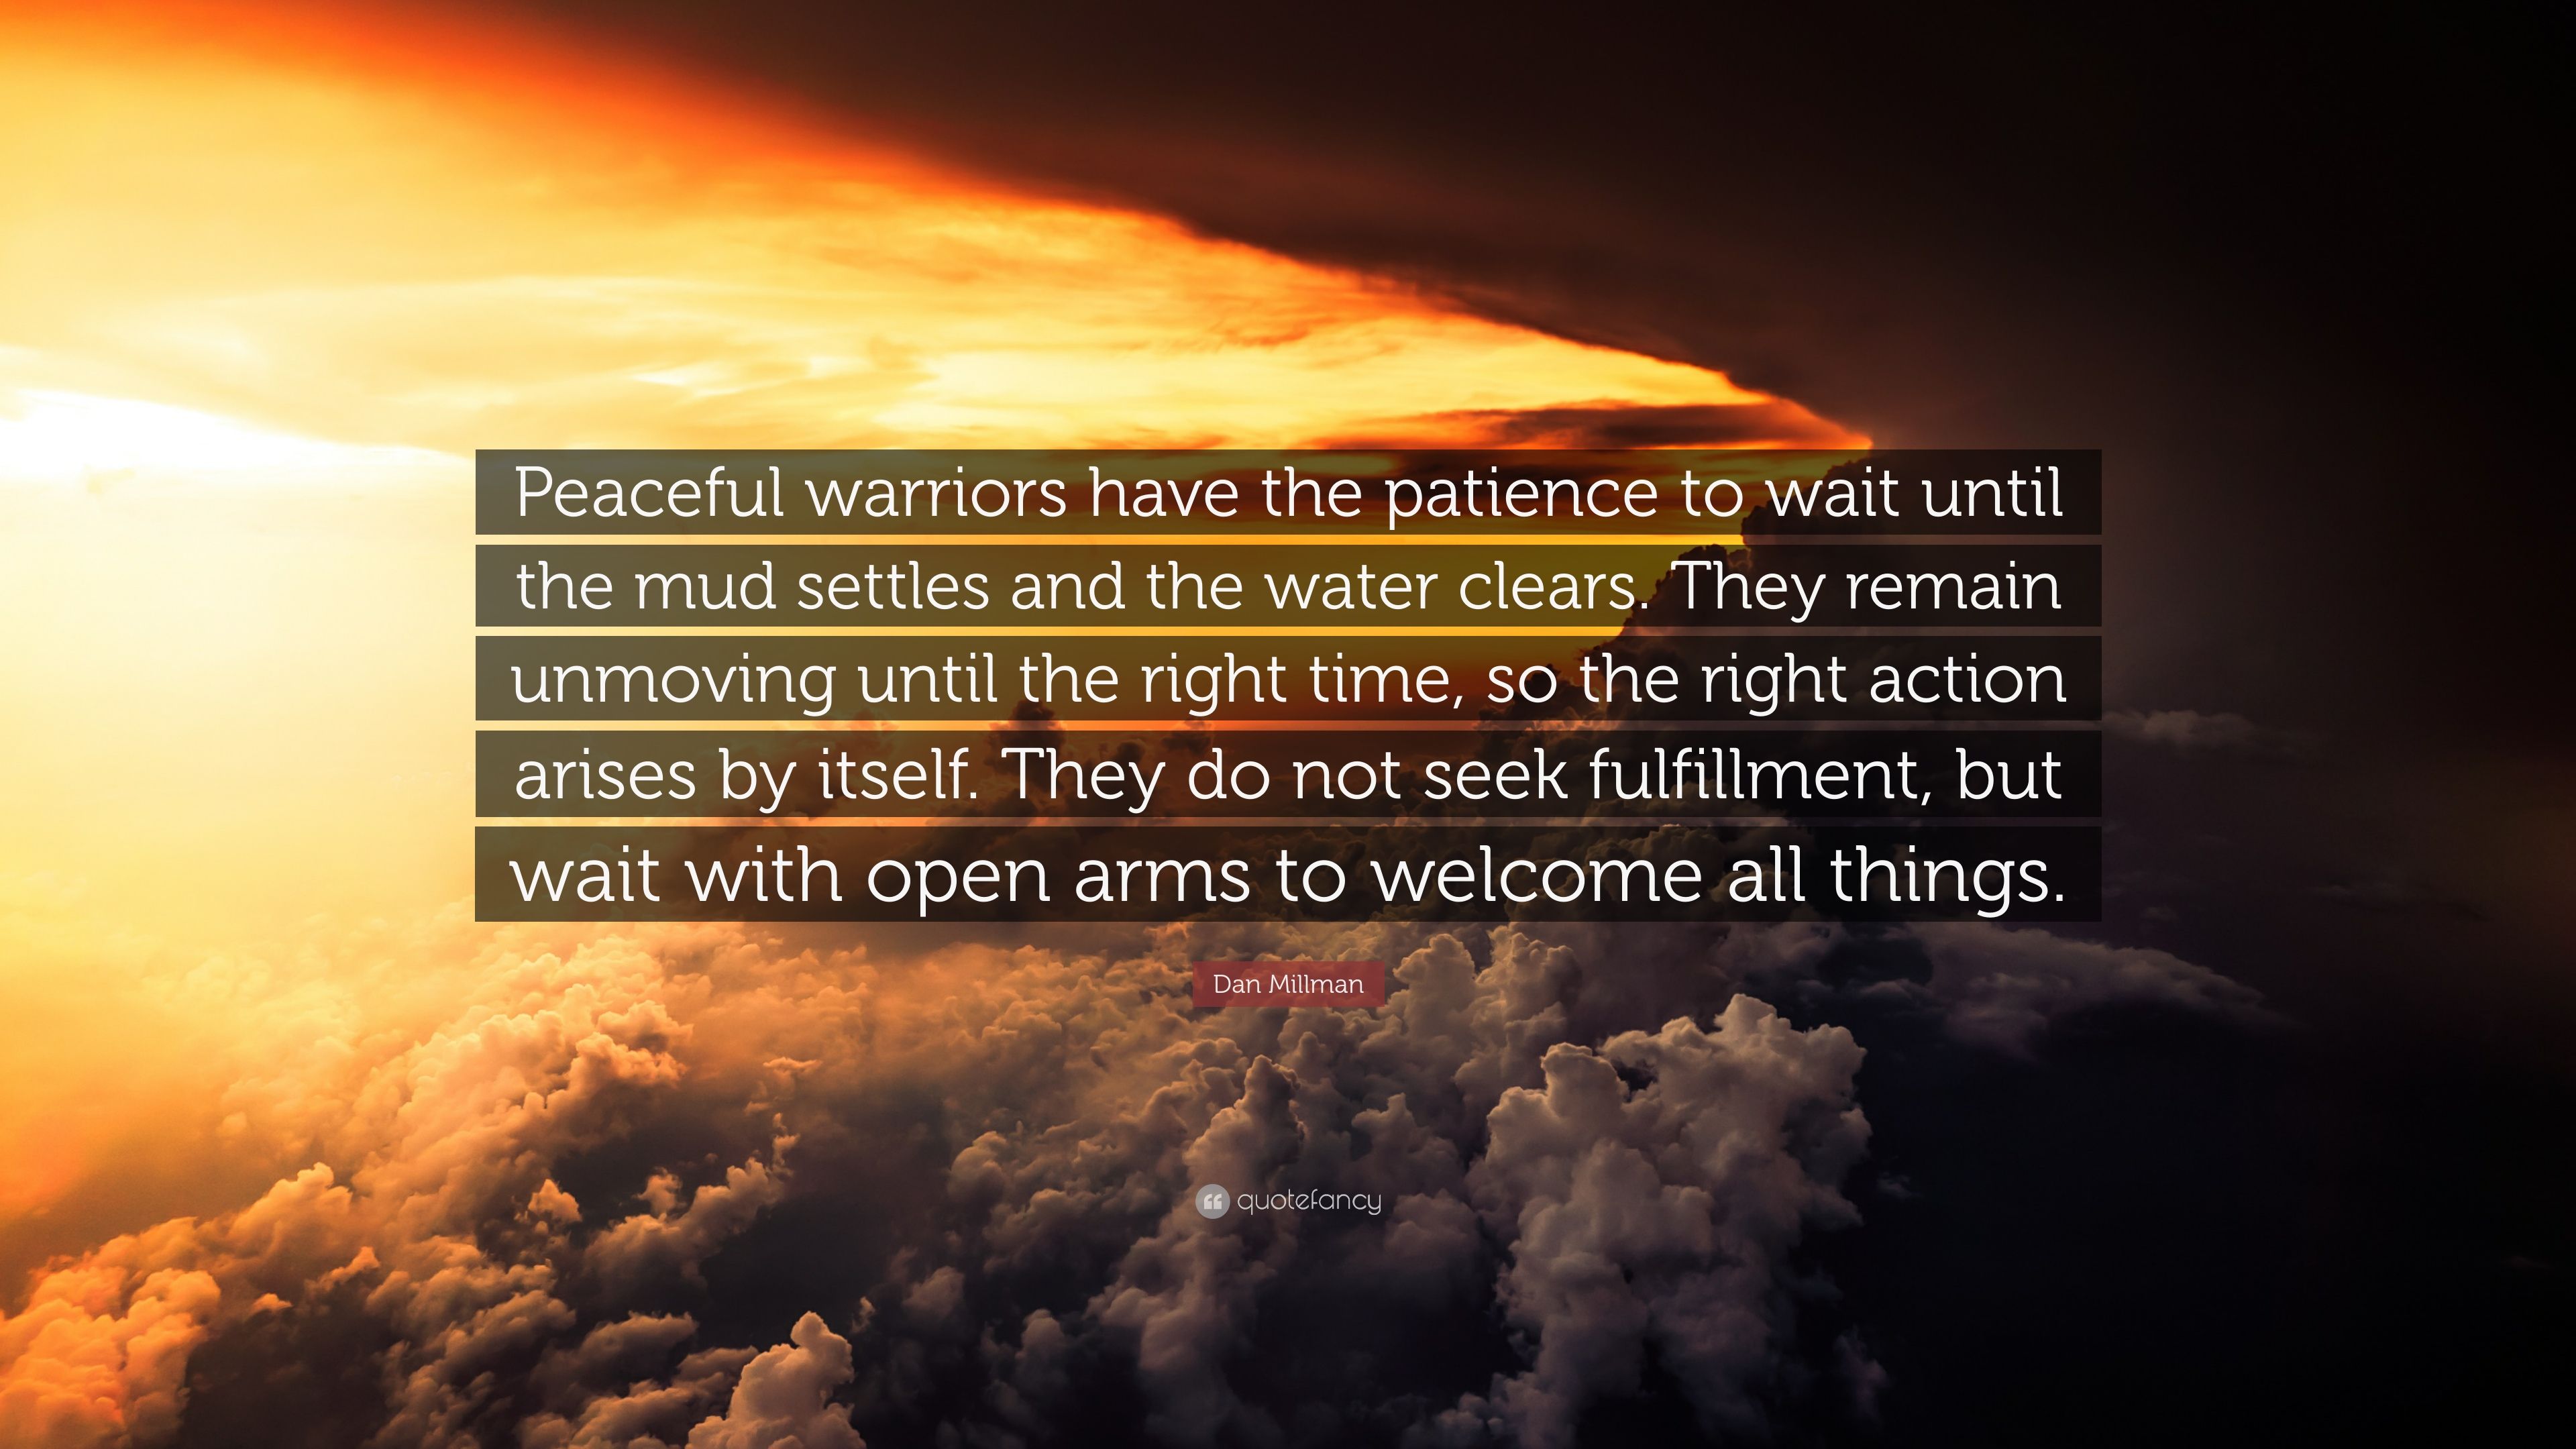 Dan Millman Quote: “Peaceful warriors have the patience to wait until the mud settles and the water clears. They remain unmoving until the r.” (10 wallpaper)